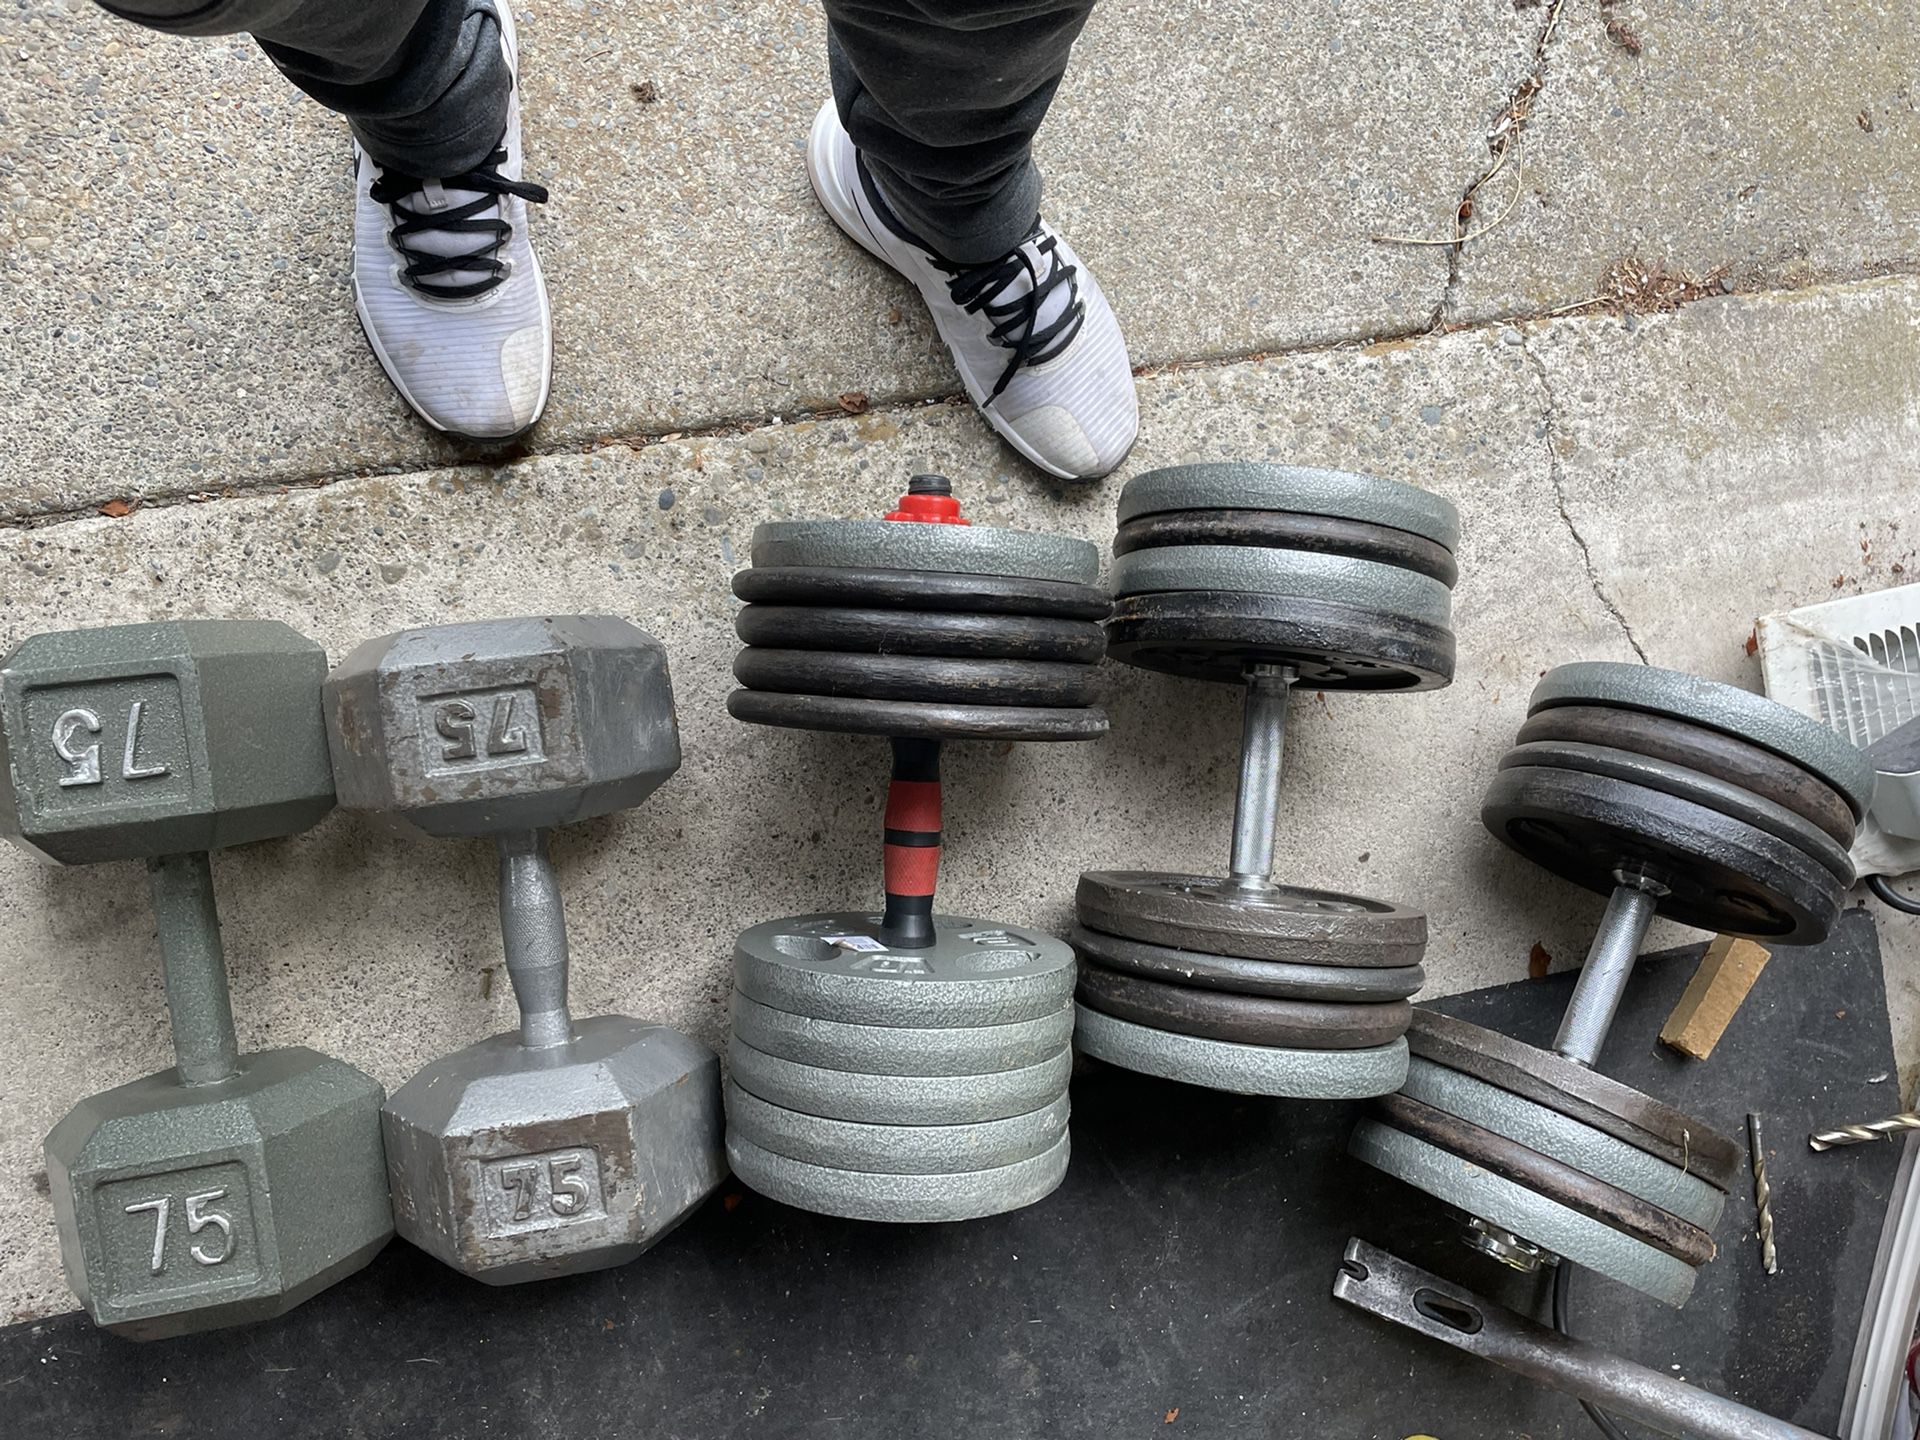 Set 75 Pounds Dumbbells Set 80 pound and justable dumbbells 100 Pounds Dumbbells 